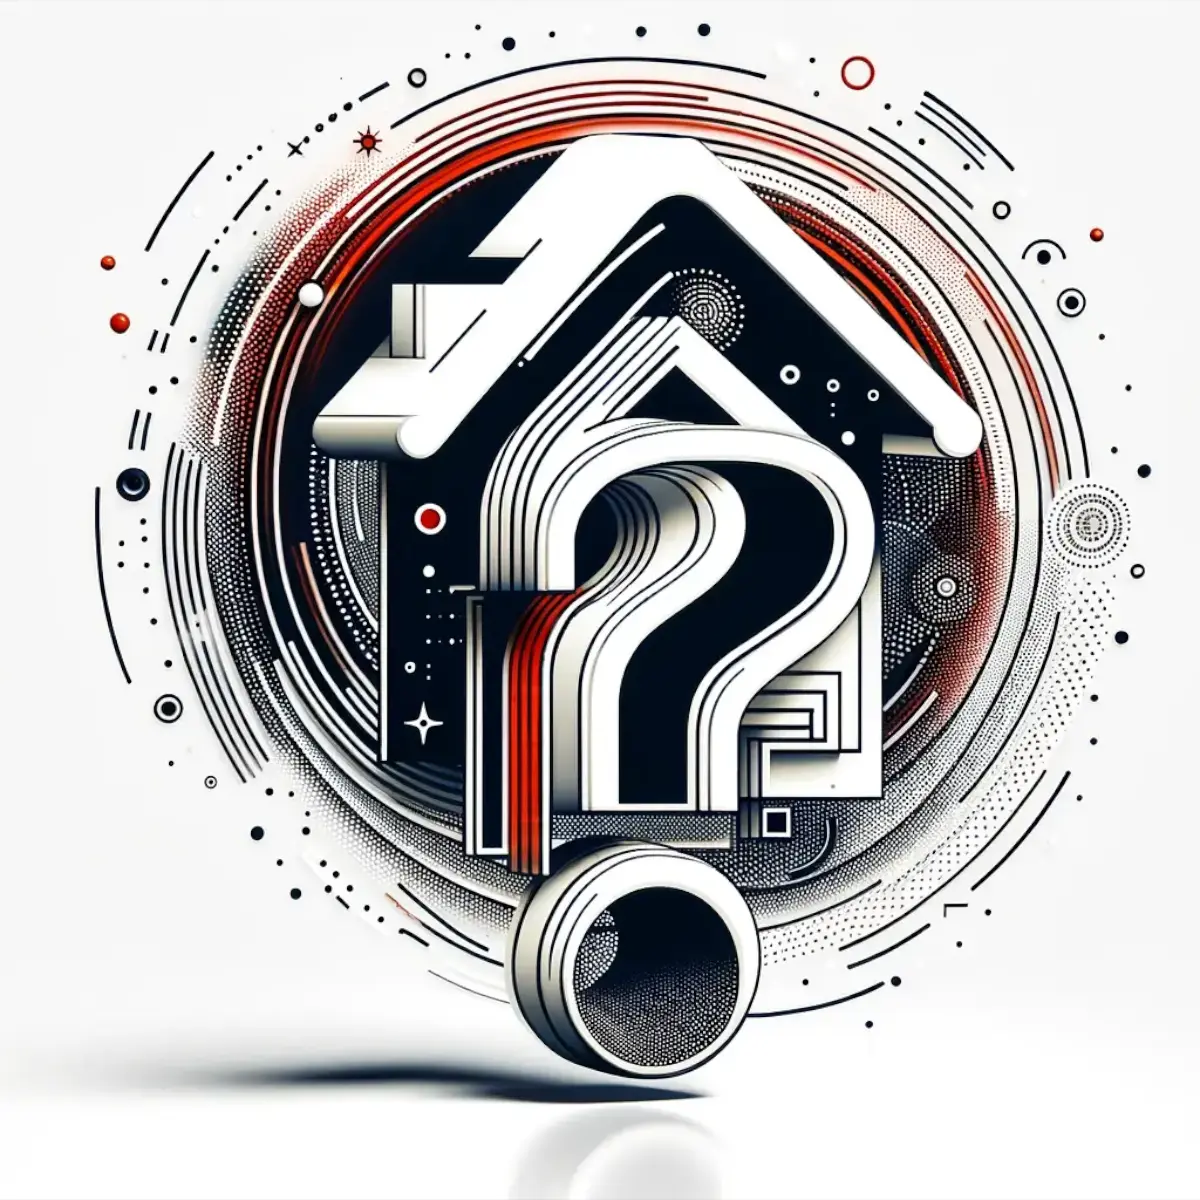 Abstract representation of real estate blog with a house and question mark in white, black, and red.